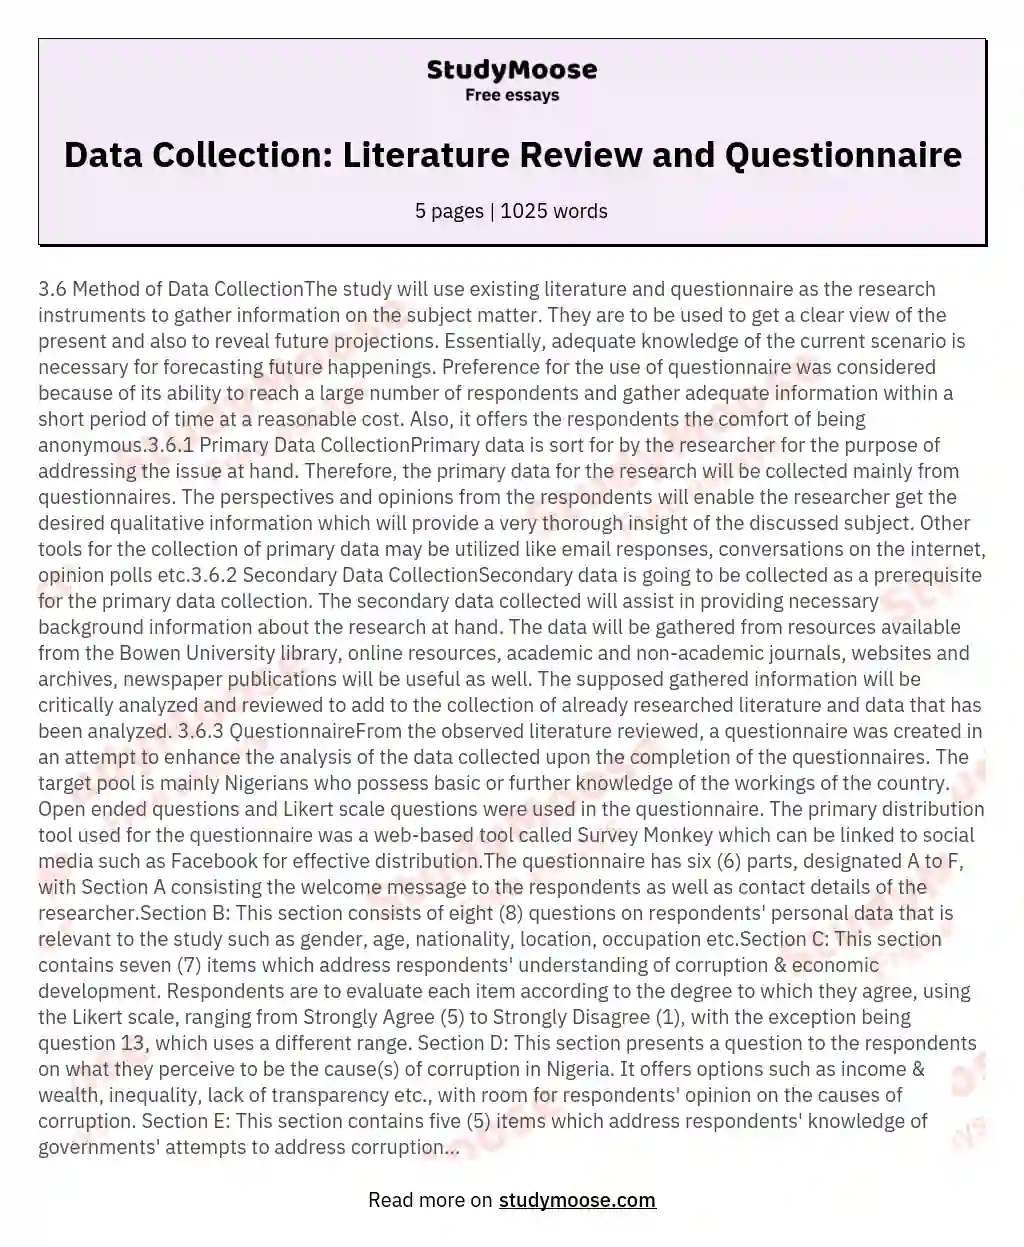 Data Collection: Literature Review and Questionnaire essay